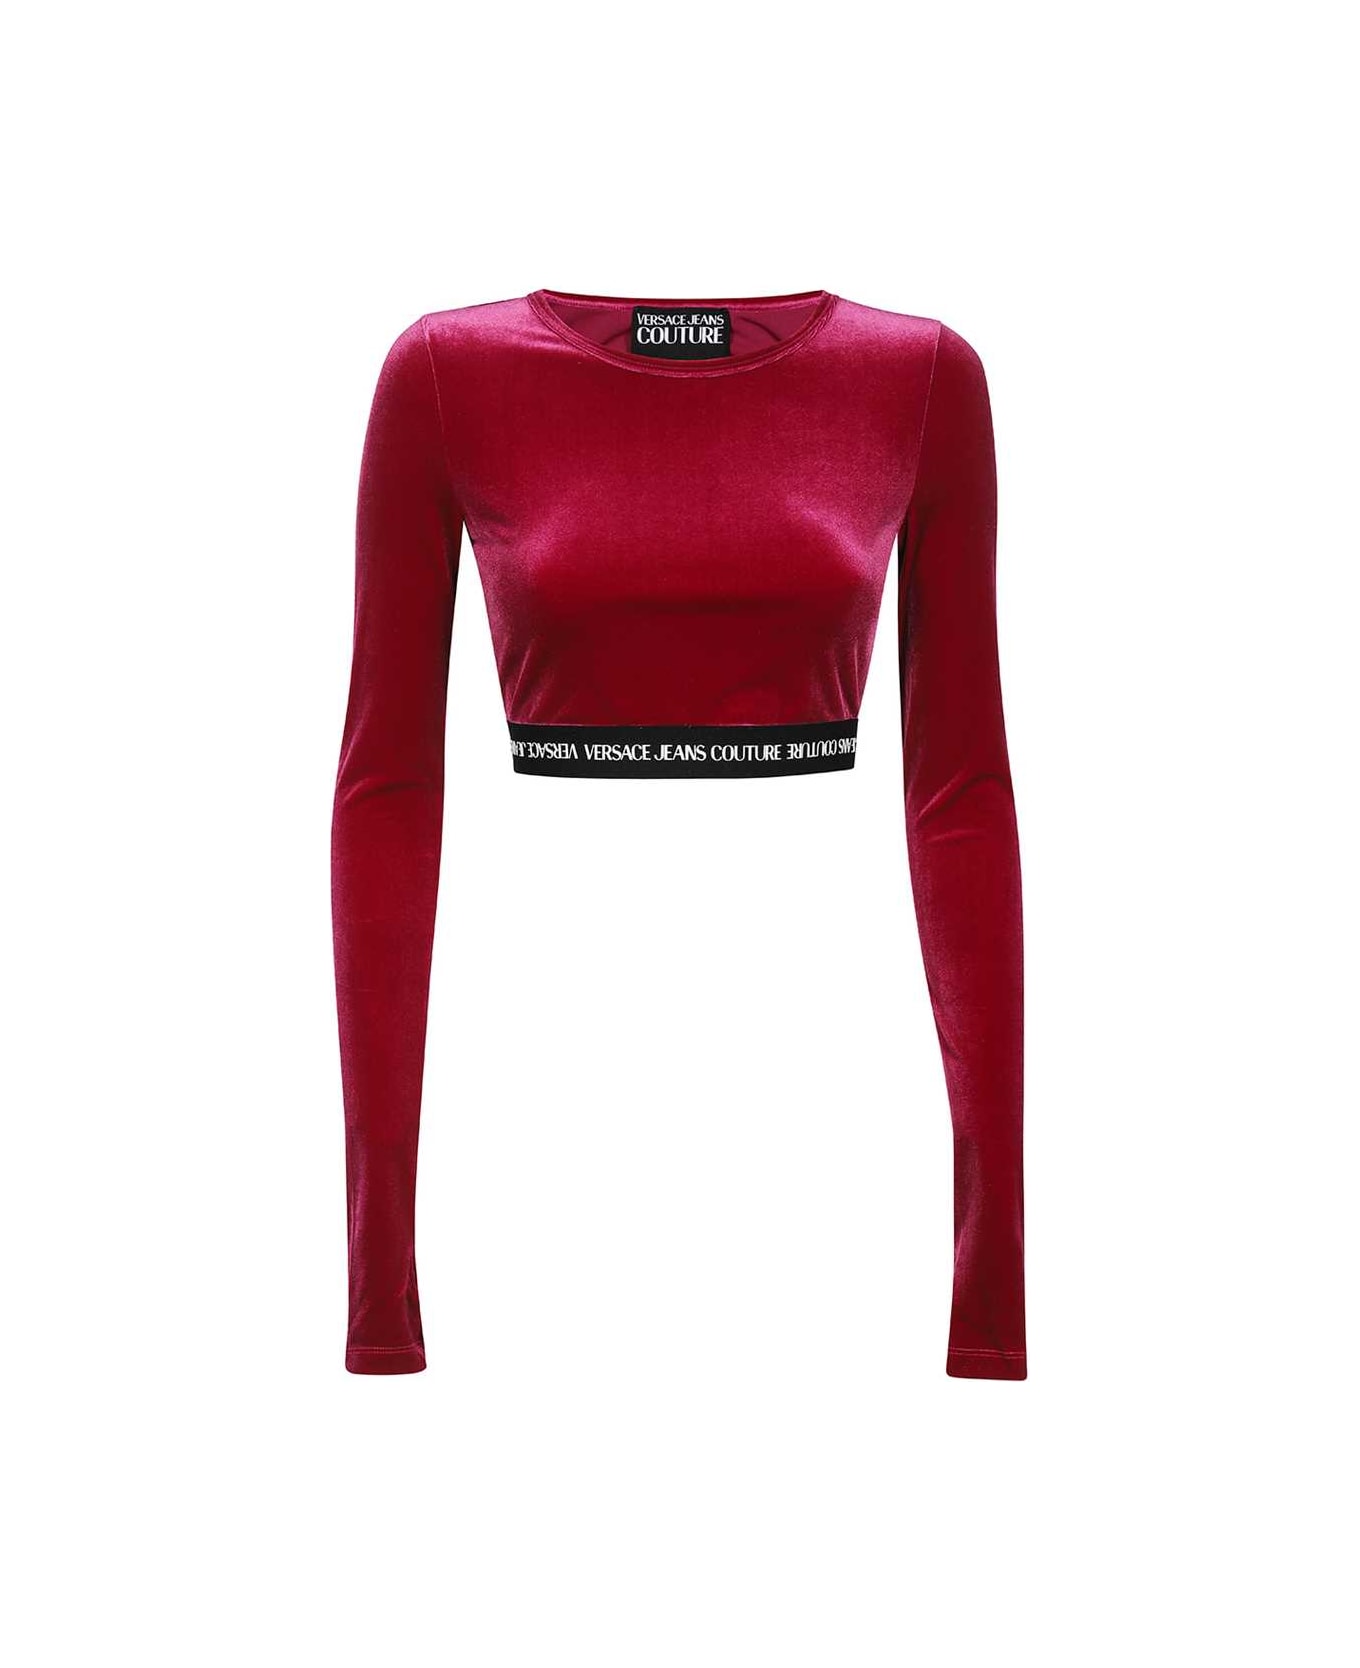 Versace Jeans Couture Long Sleeve Crop Top - red